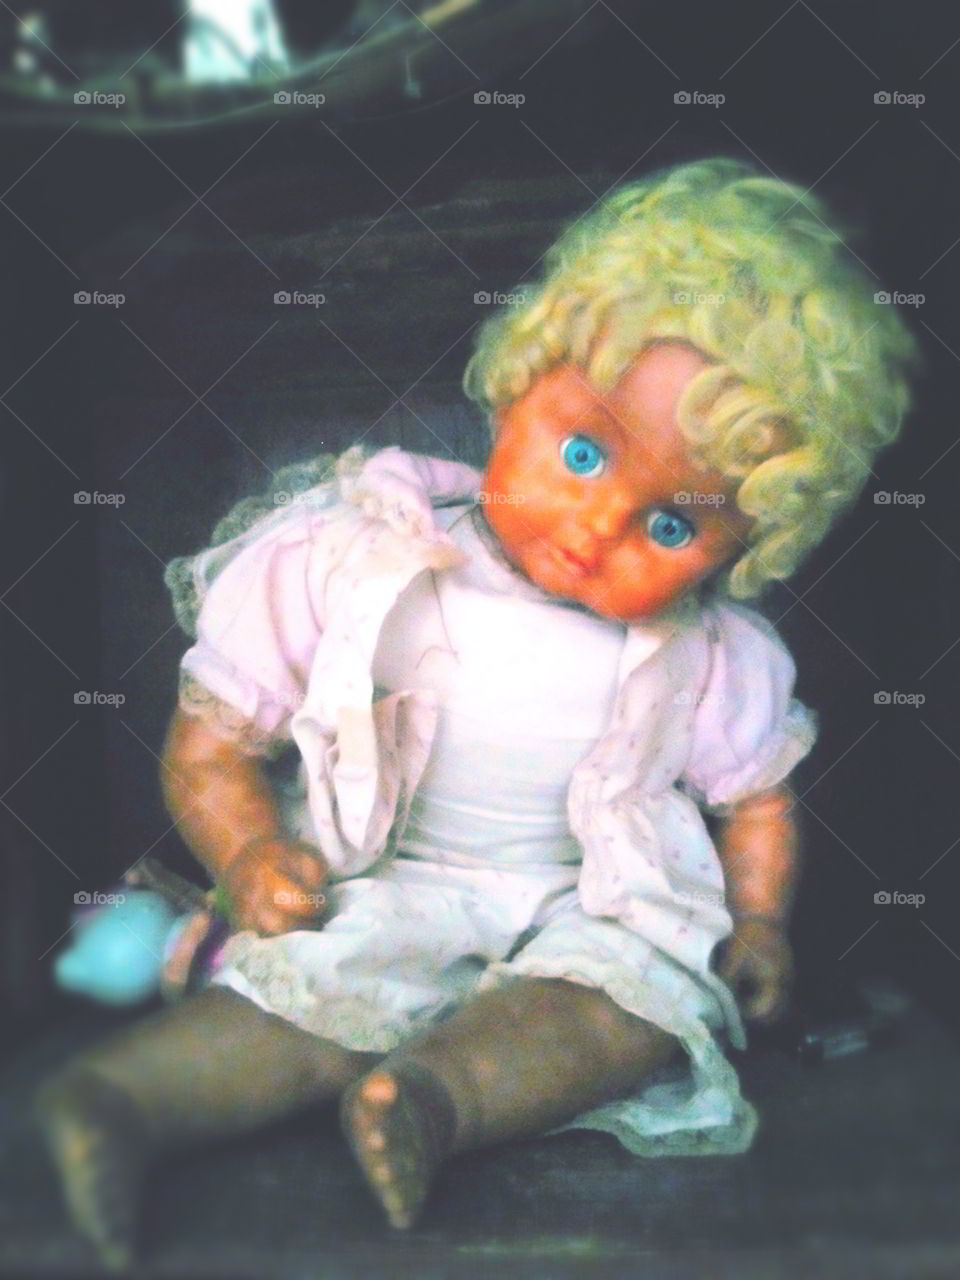 the doll who look like pedophile victim